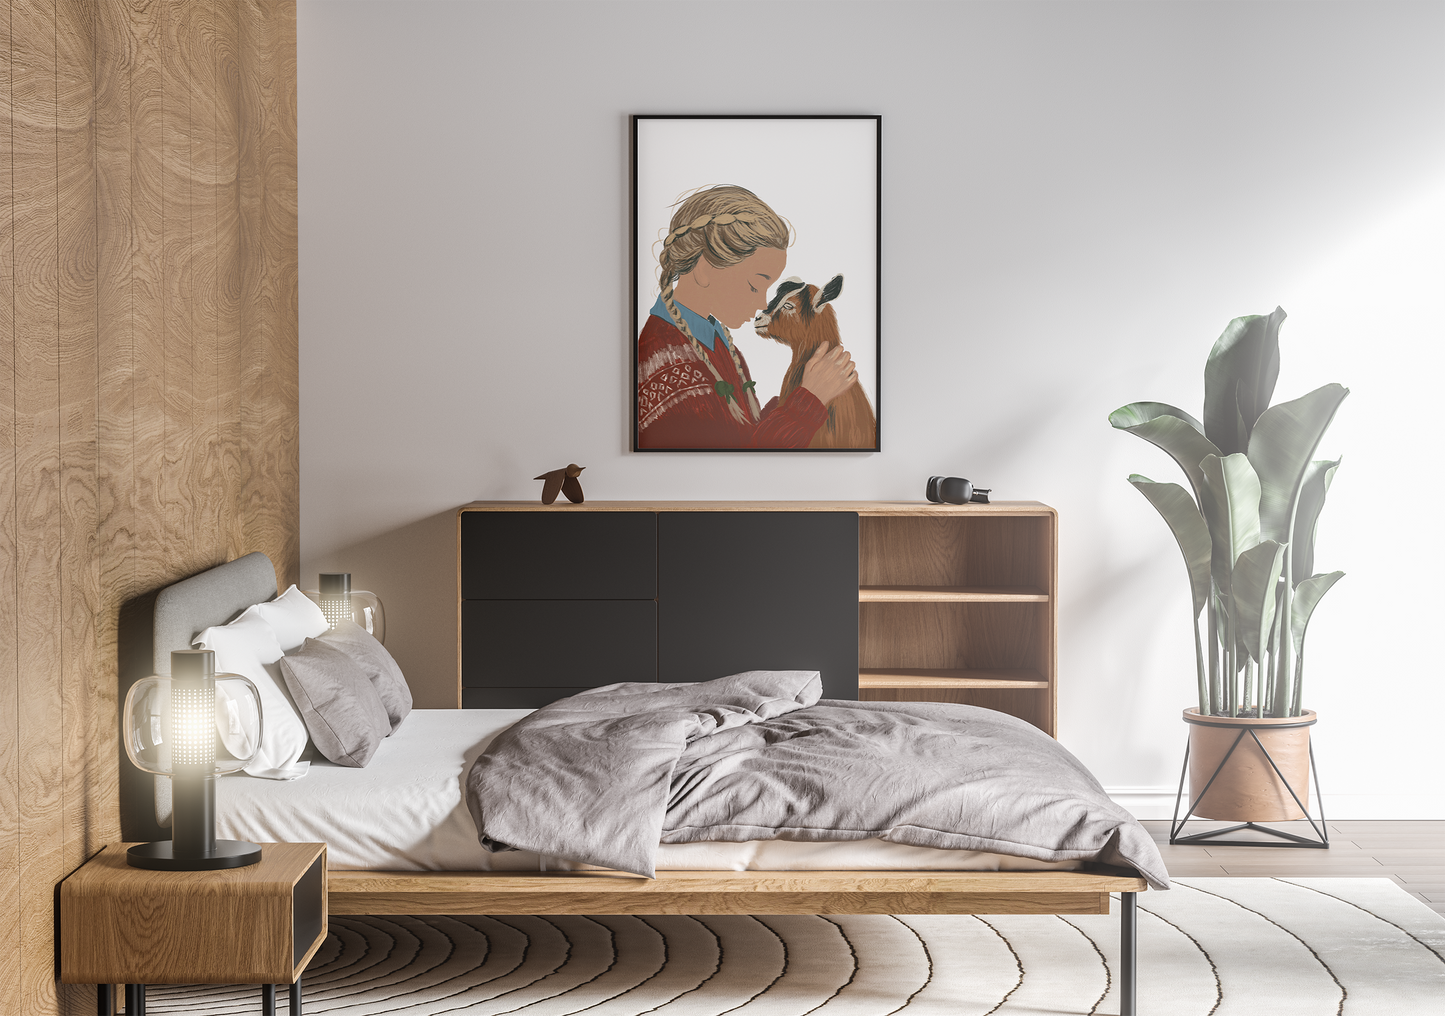 A serene bedroom setting with a printable digital artwork of a girl caressing a goat, hung above a minimalist dresser next to a potted plant